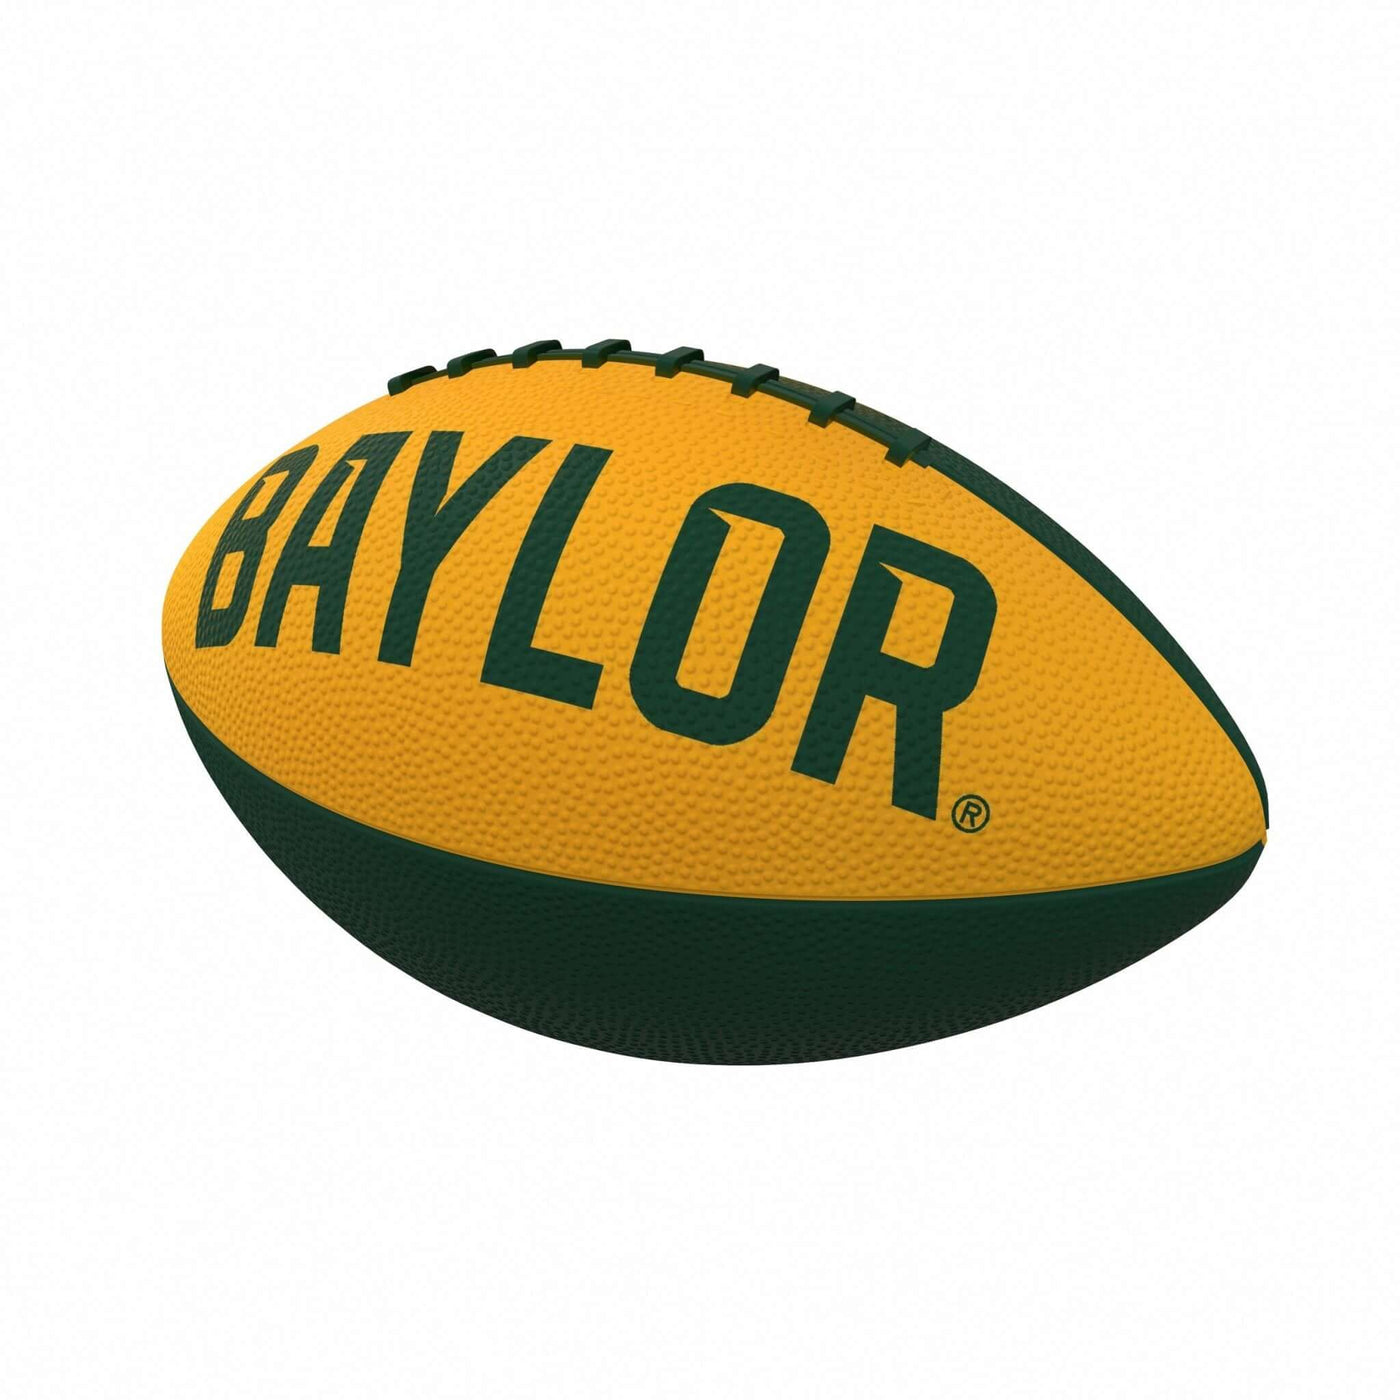 Baylor Repeating Mini-Size Rubber Football - Logo Brands